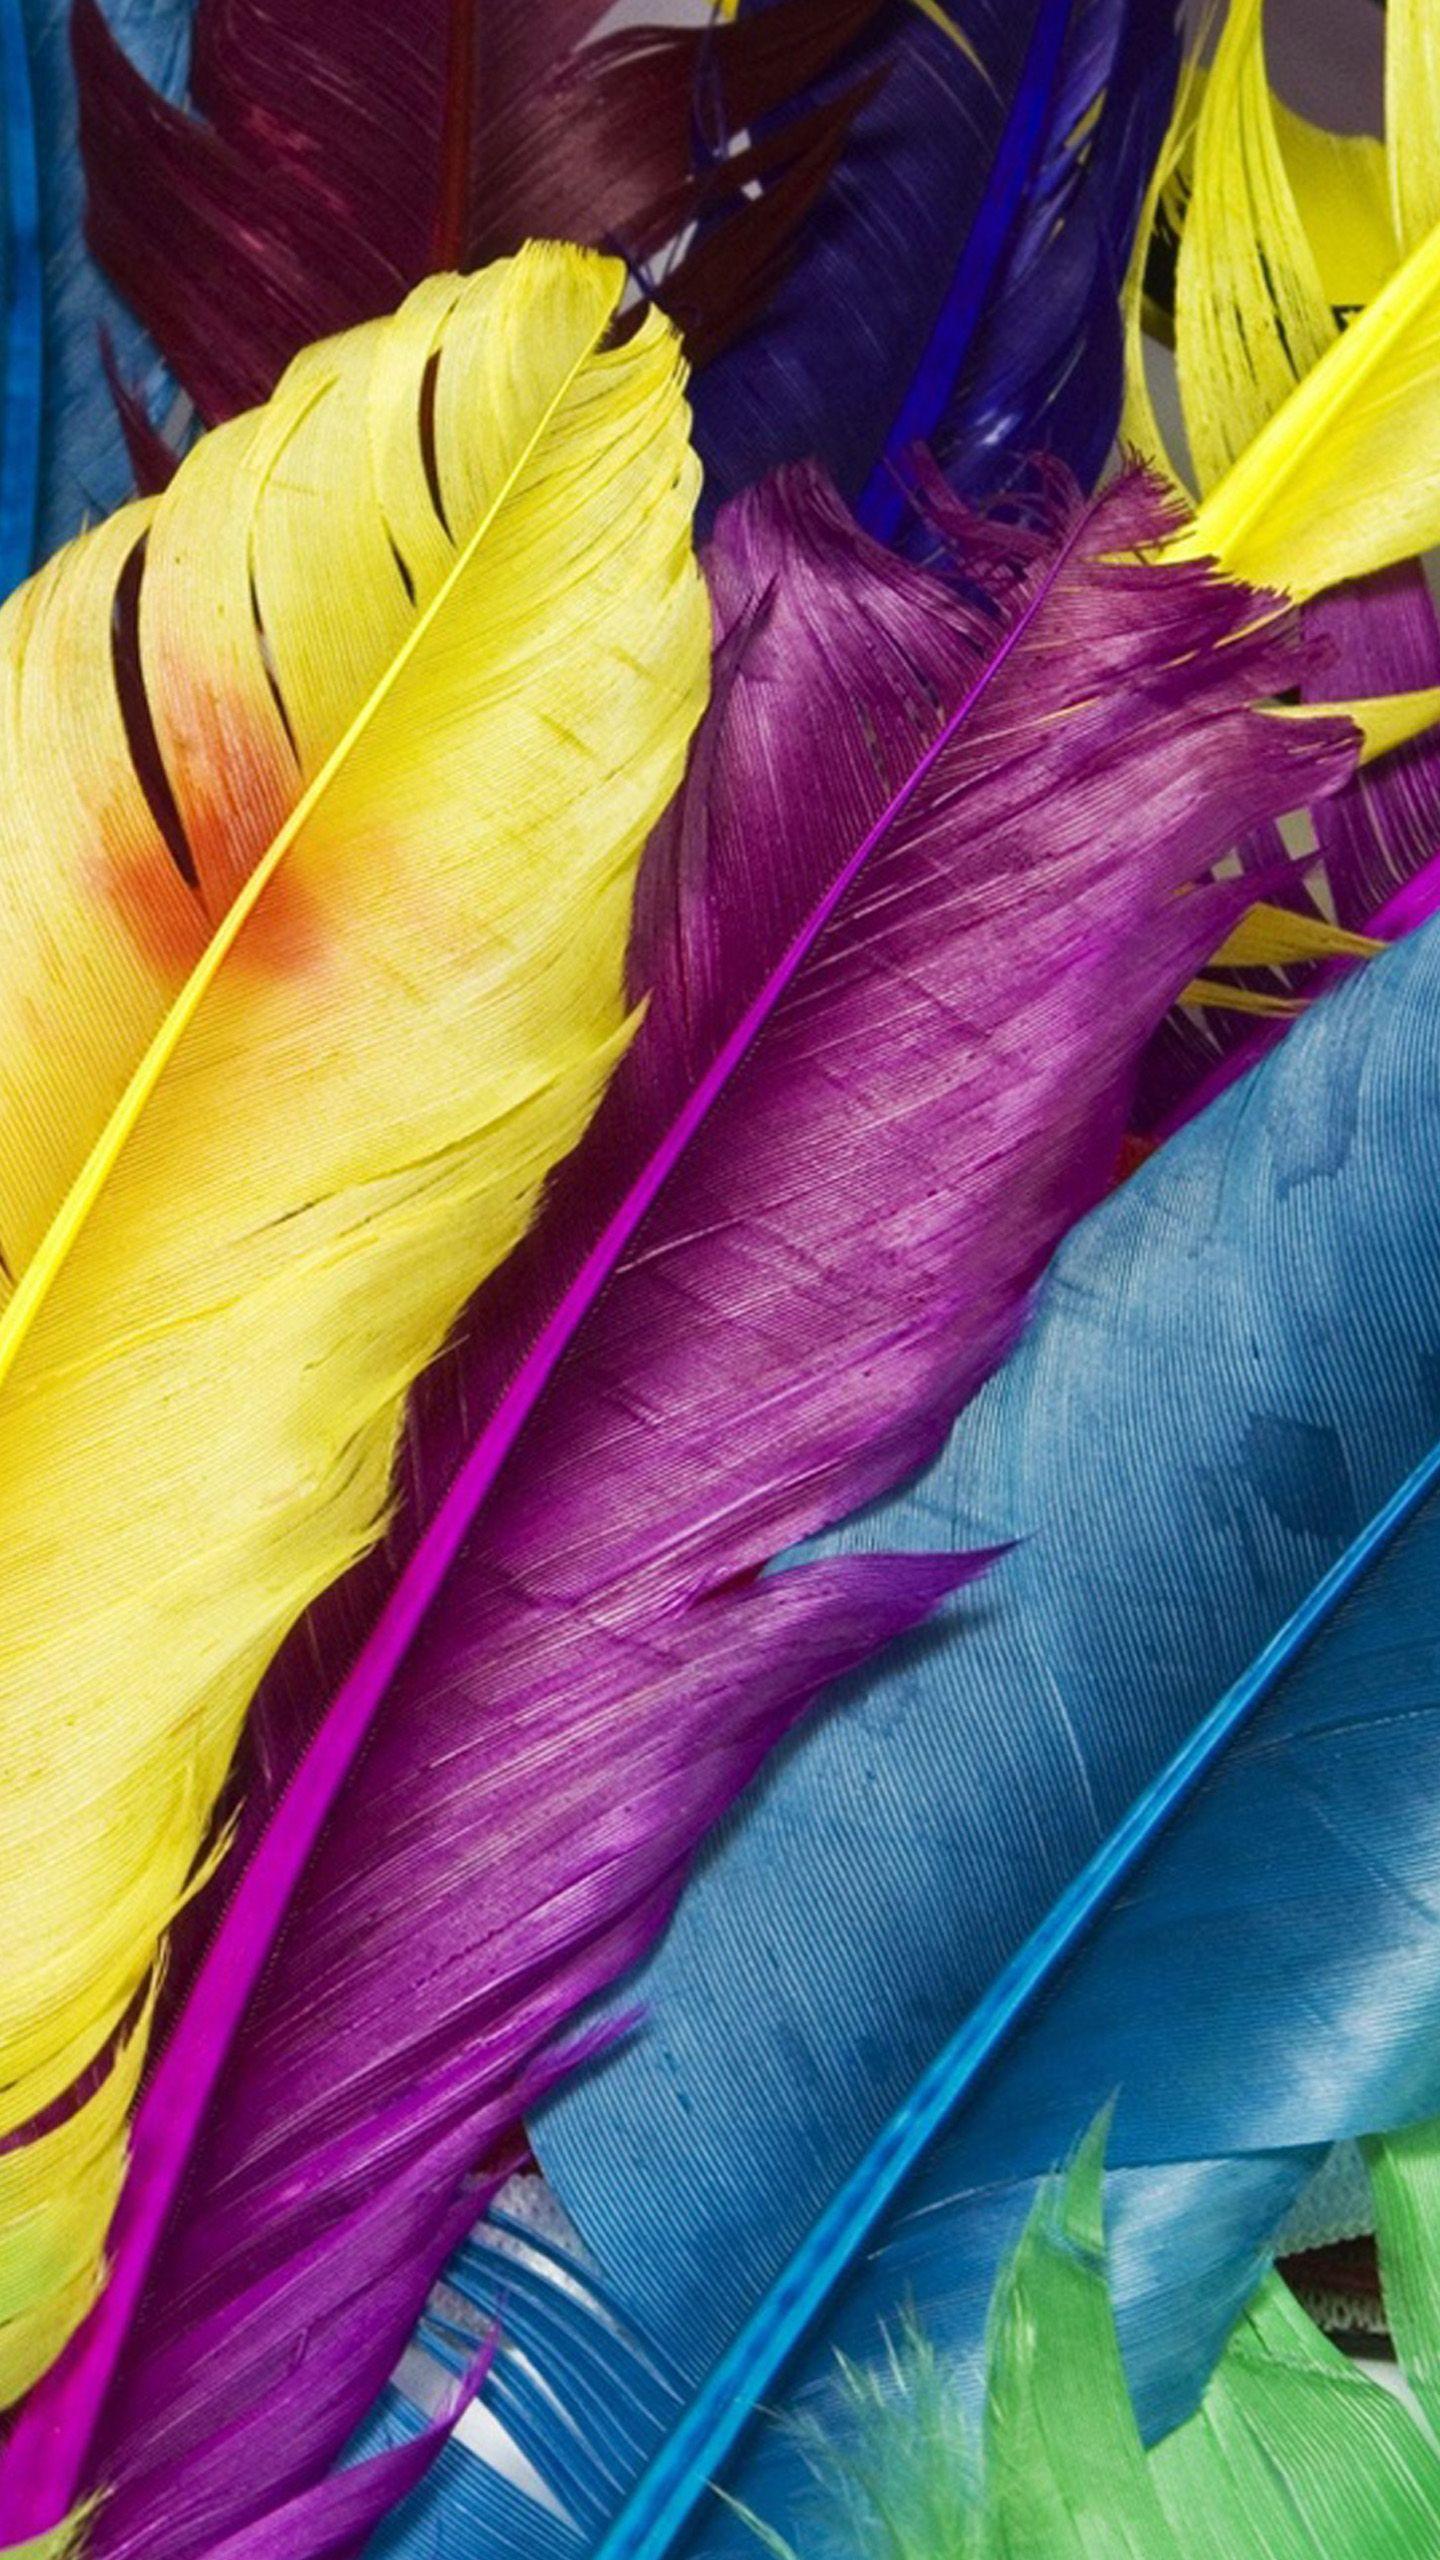 Colorful Feathers Wallpaper for Galaxy S6. Dreamcatchers, feathers